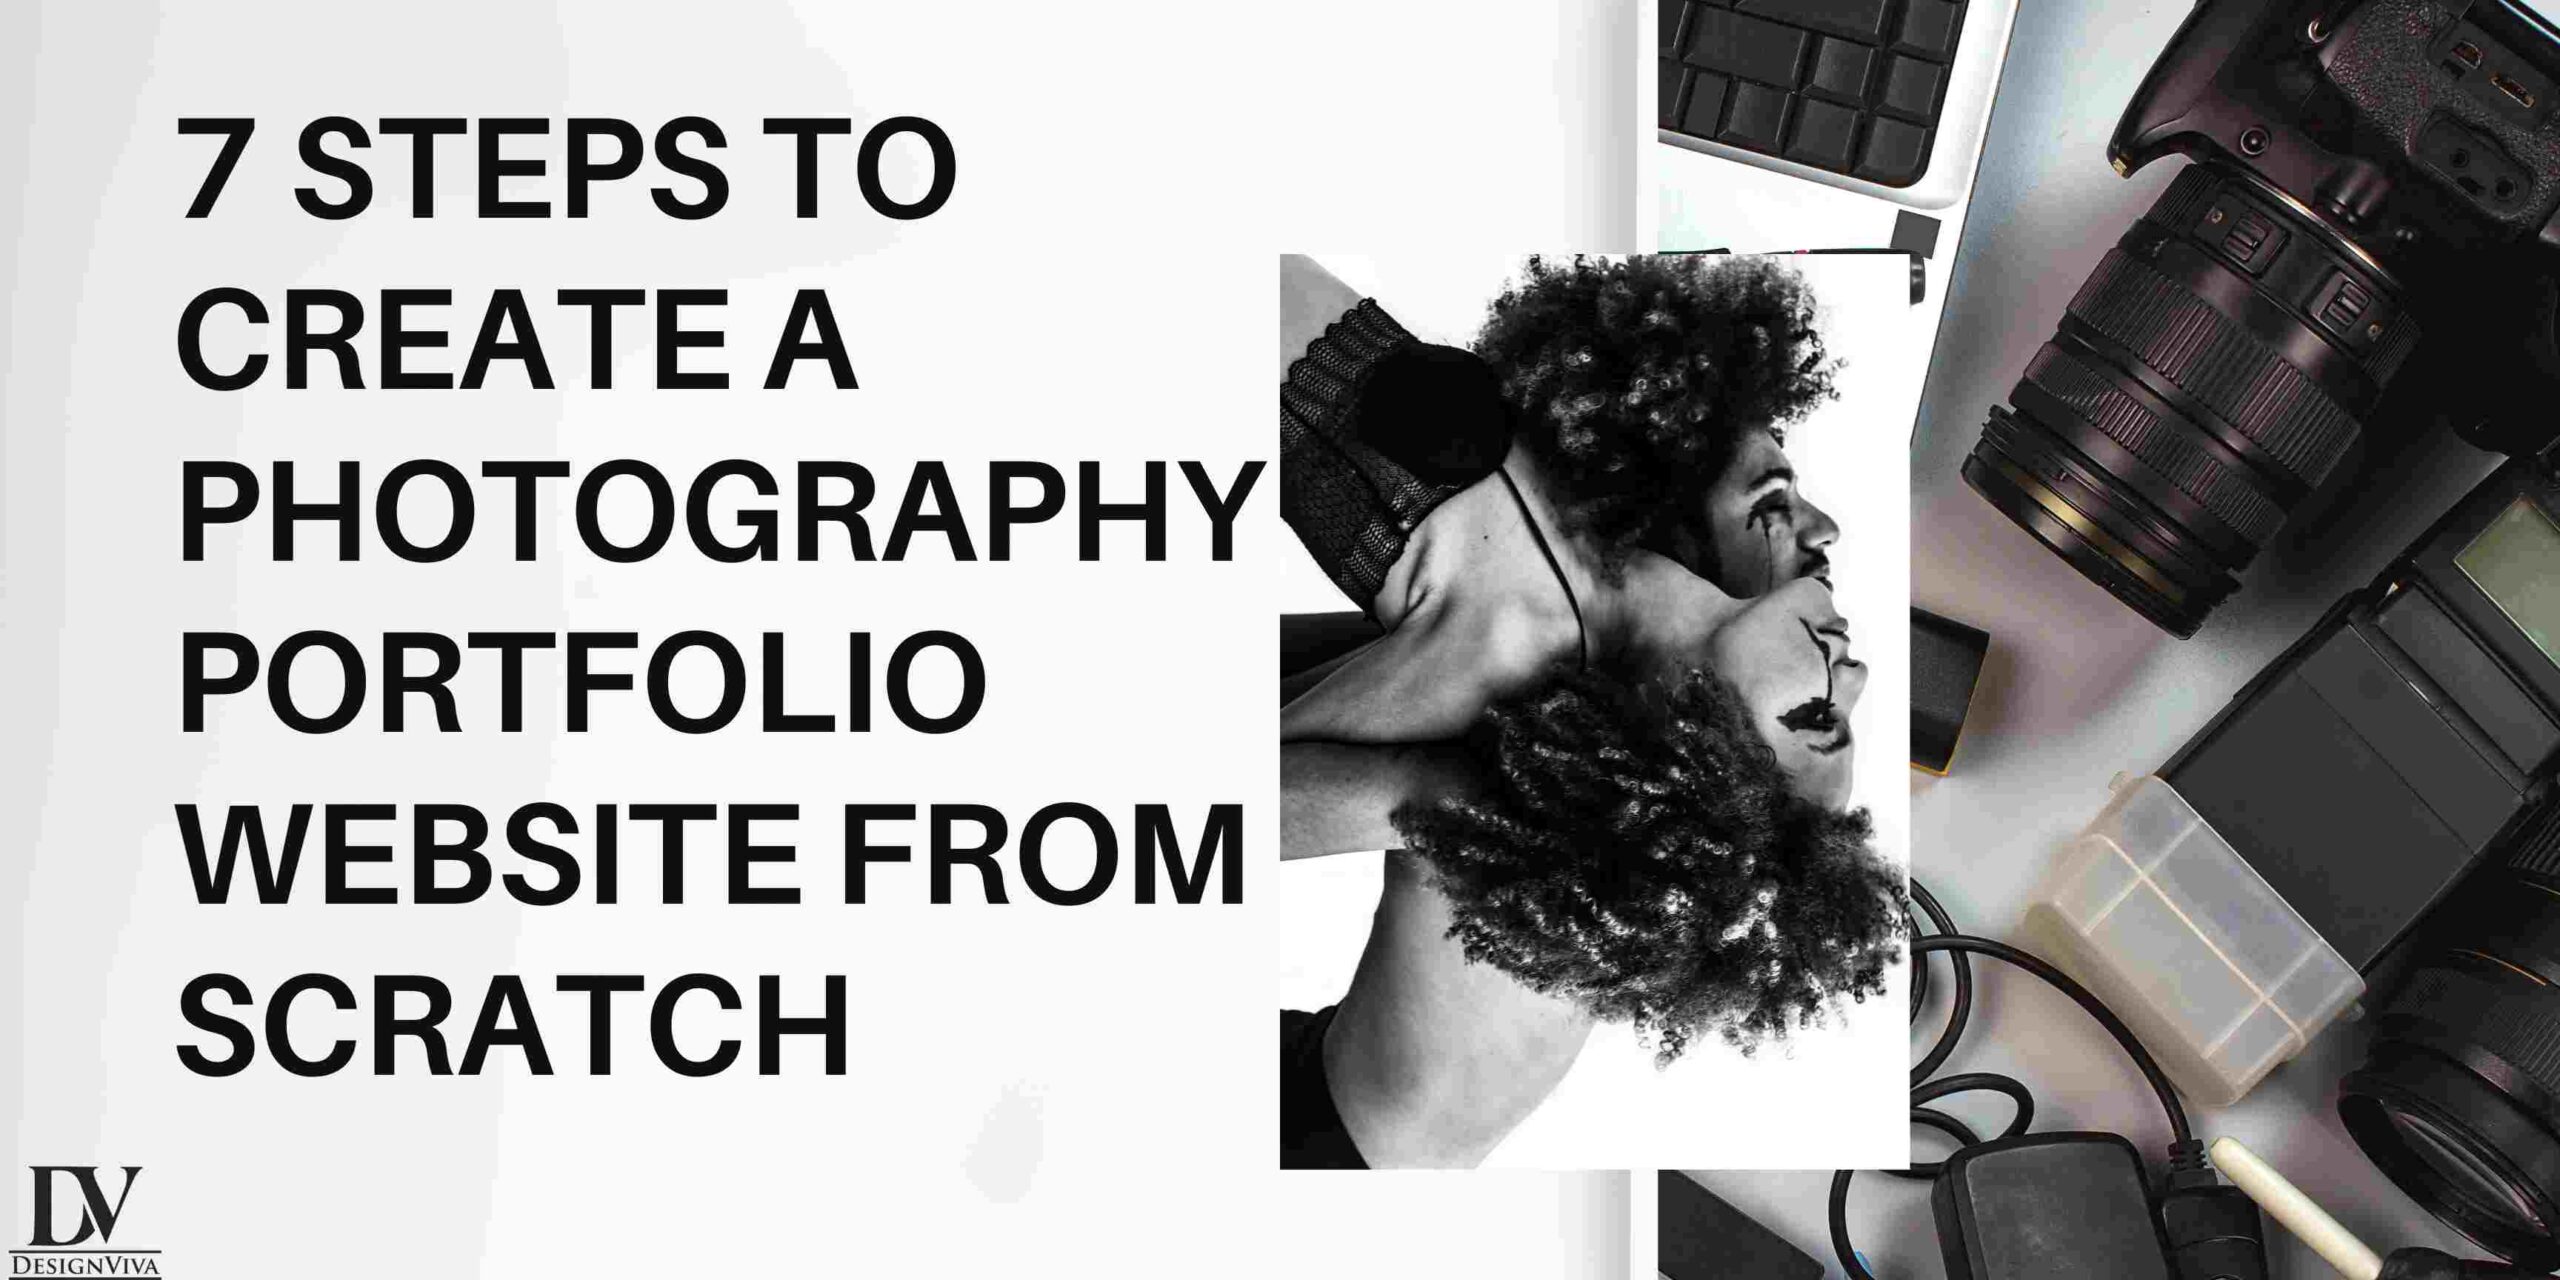 7 Steps To Create A Photography Portfolio Website From Scratch